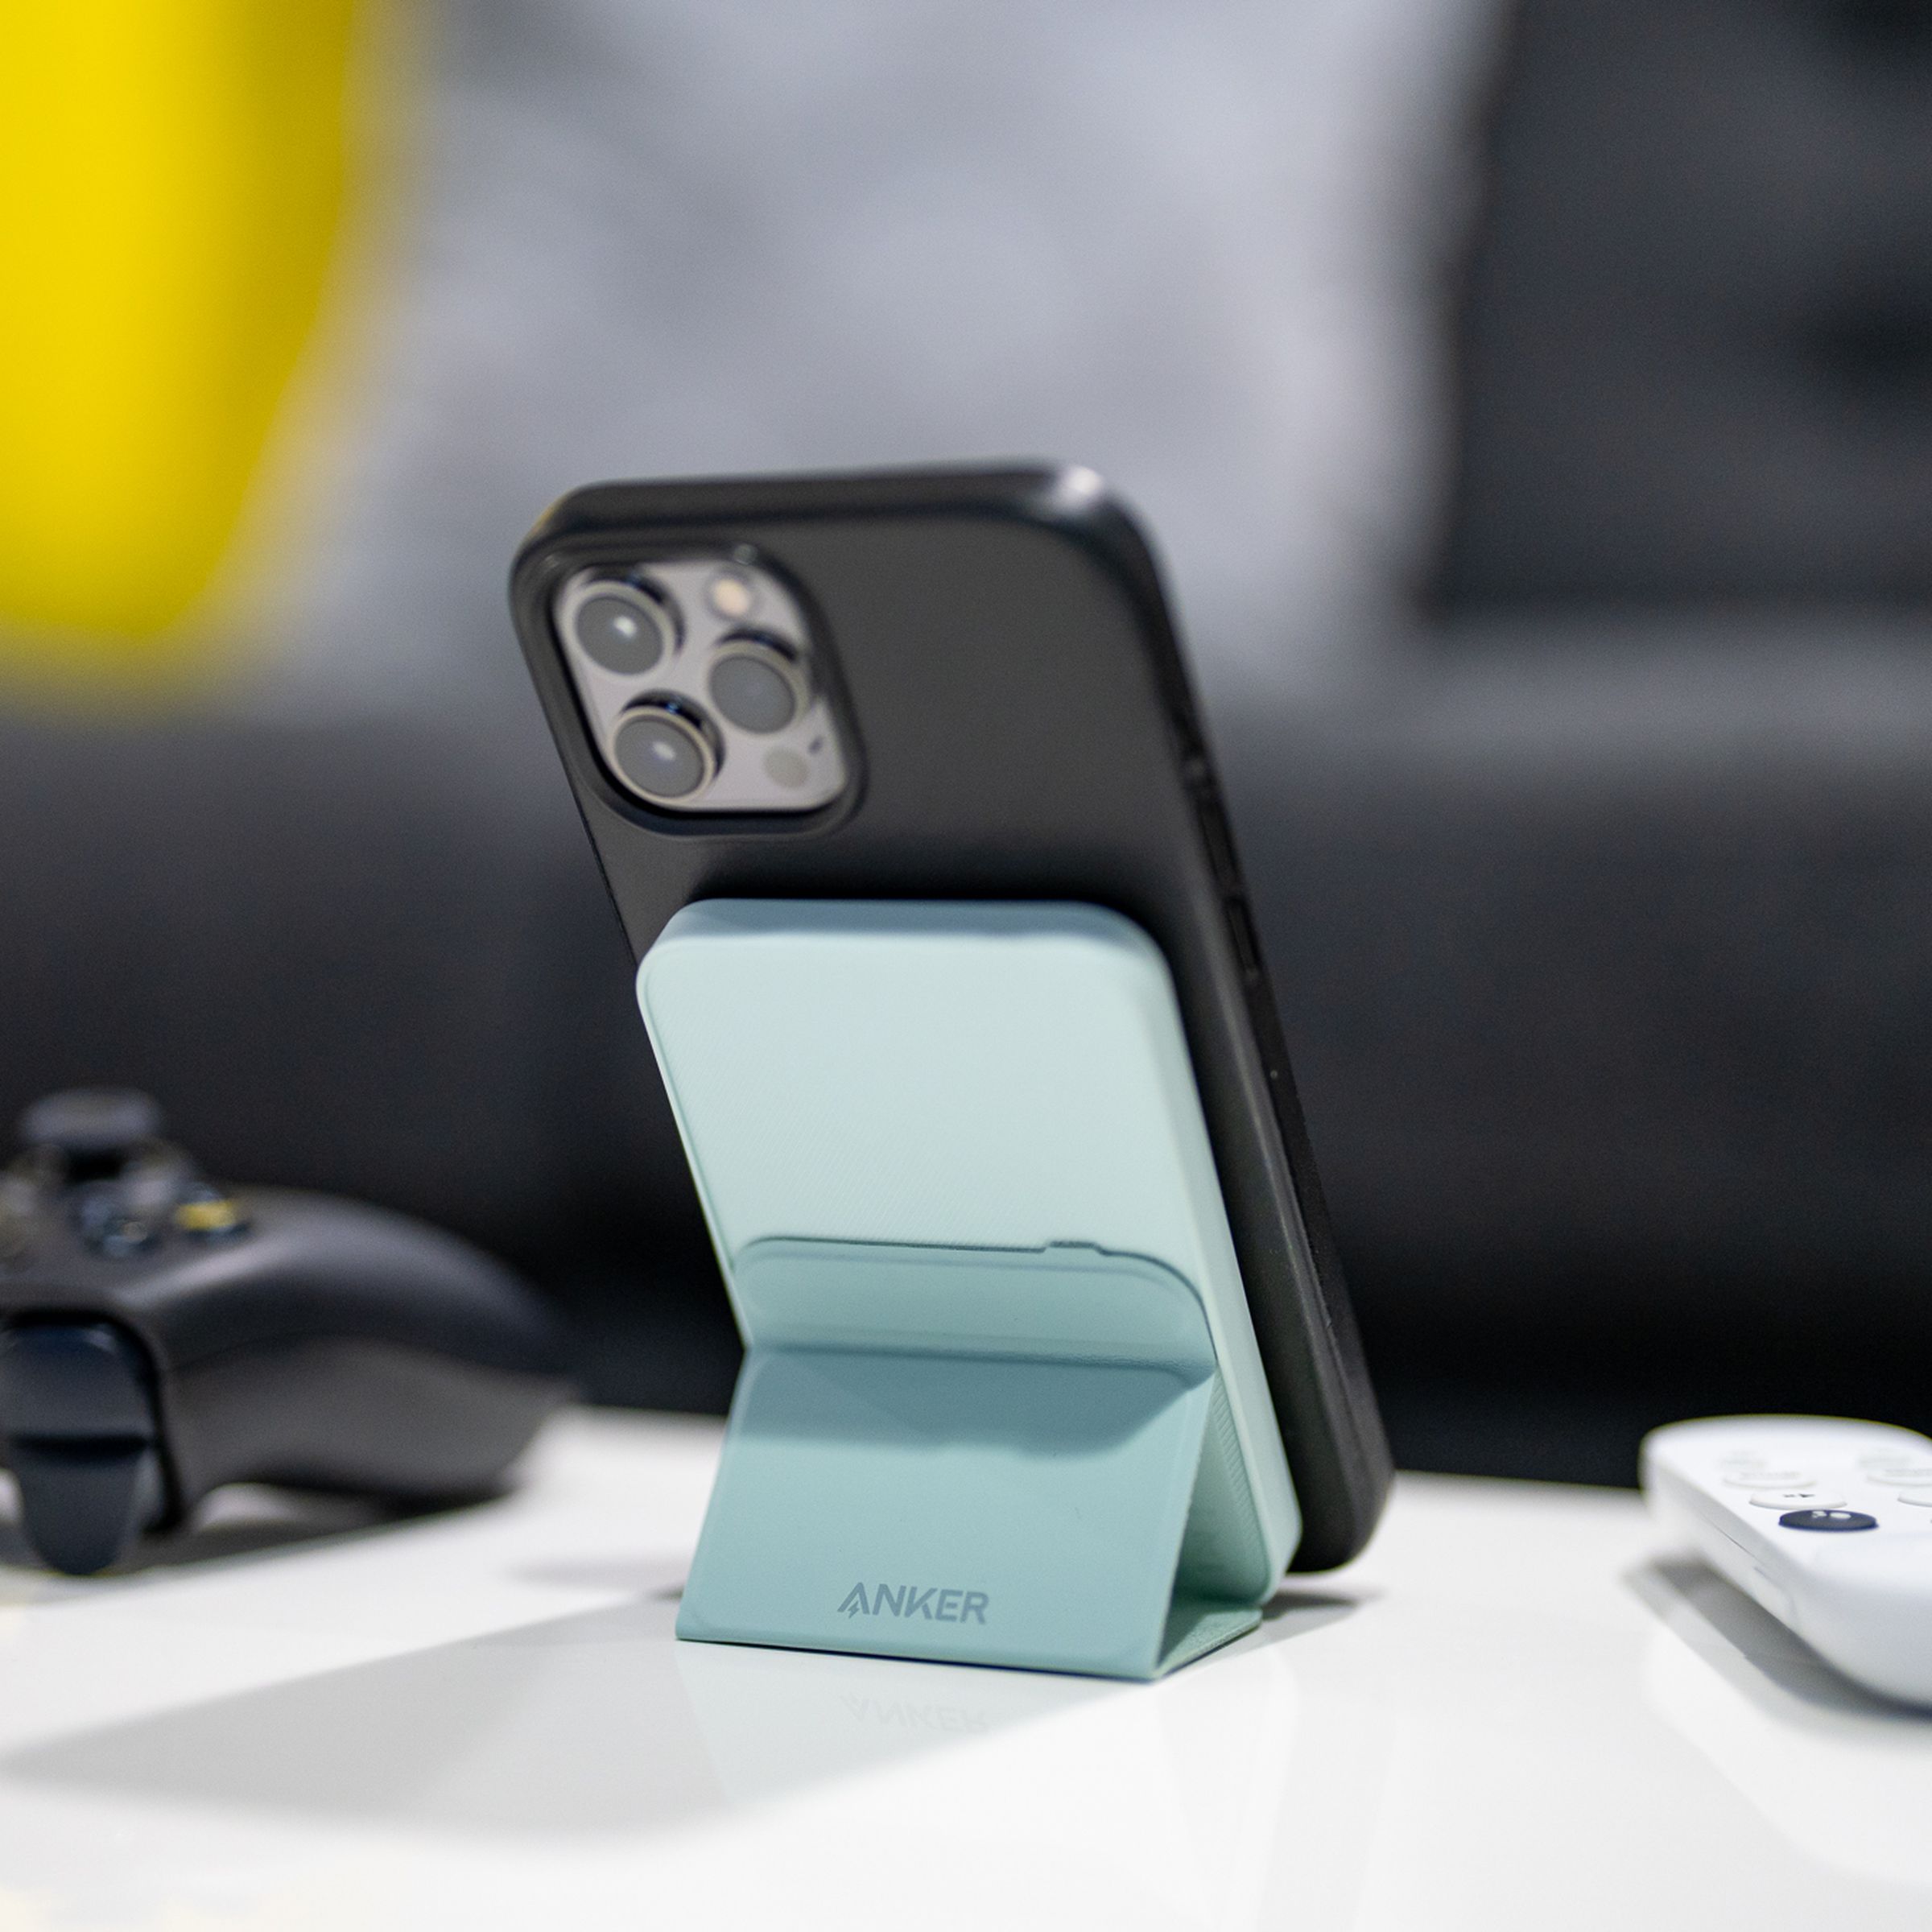 Anker’s 622 Magnetic Battery (MagGo) holding up an iPhone with its kickstand on a desk.